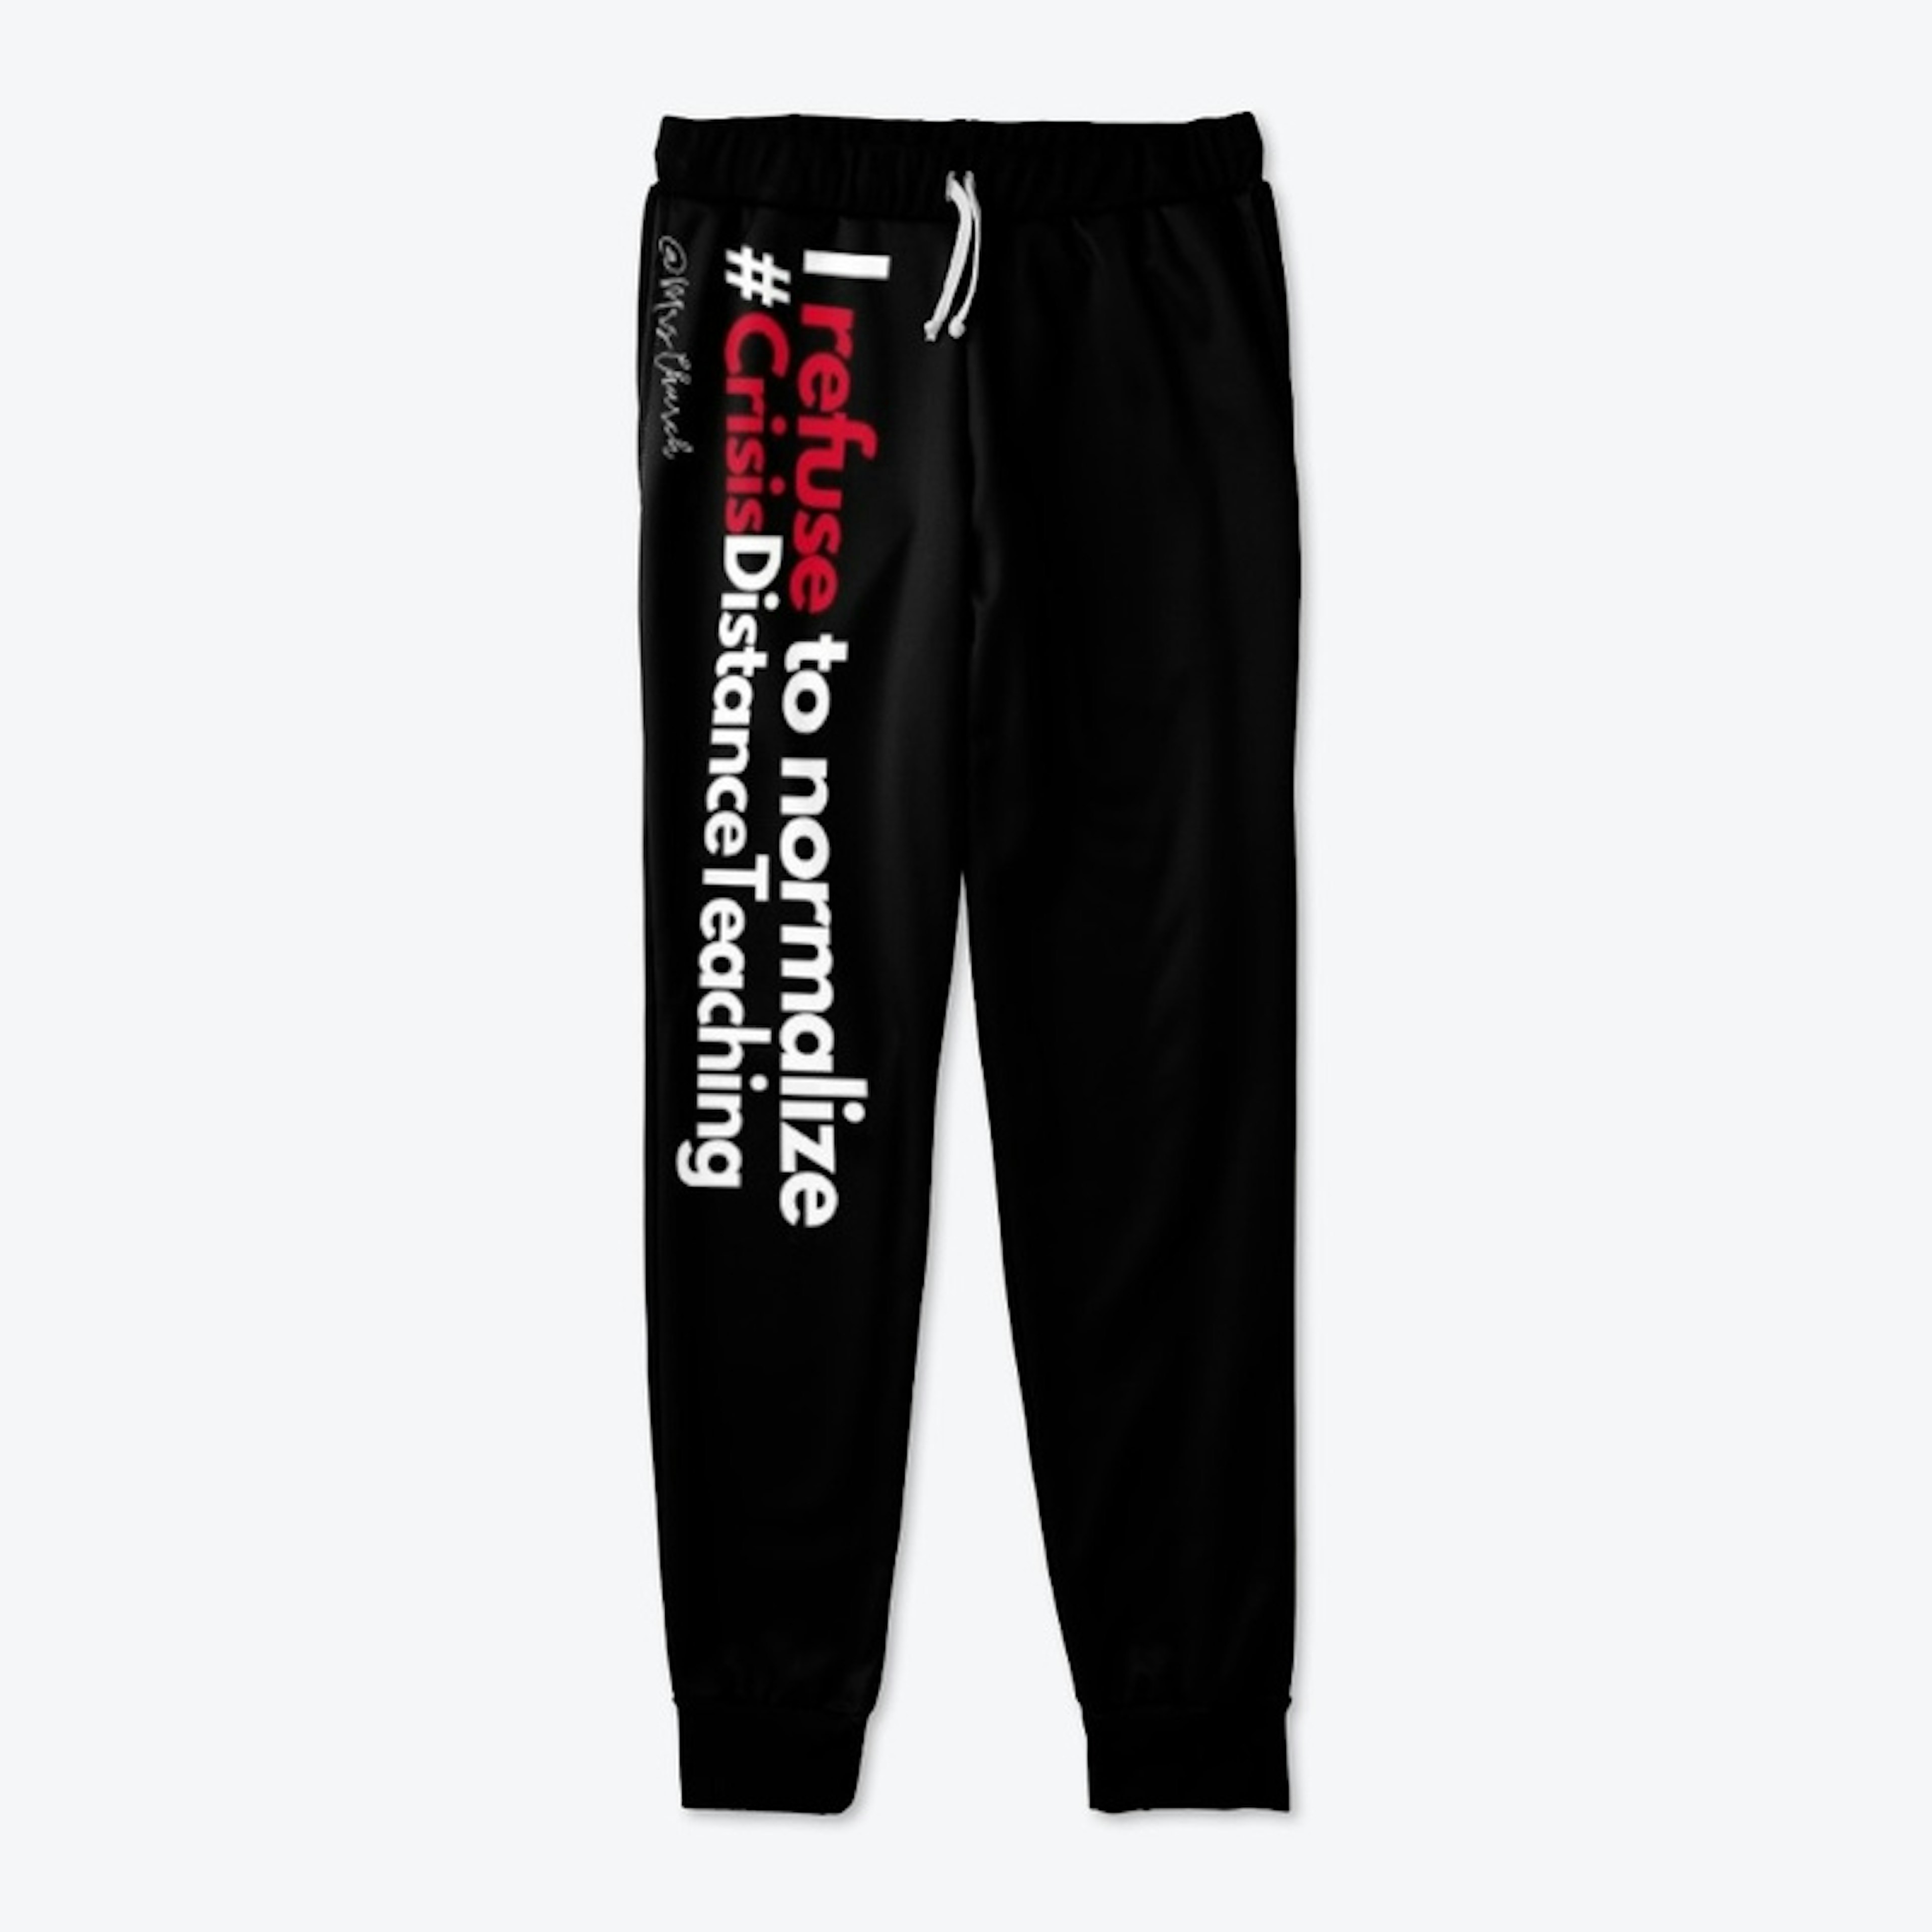 I refuse to normalize this - Joggers